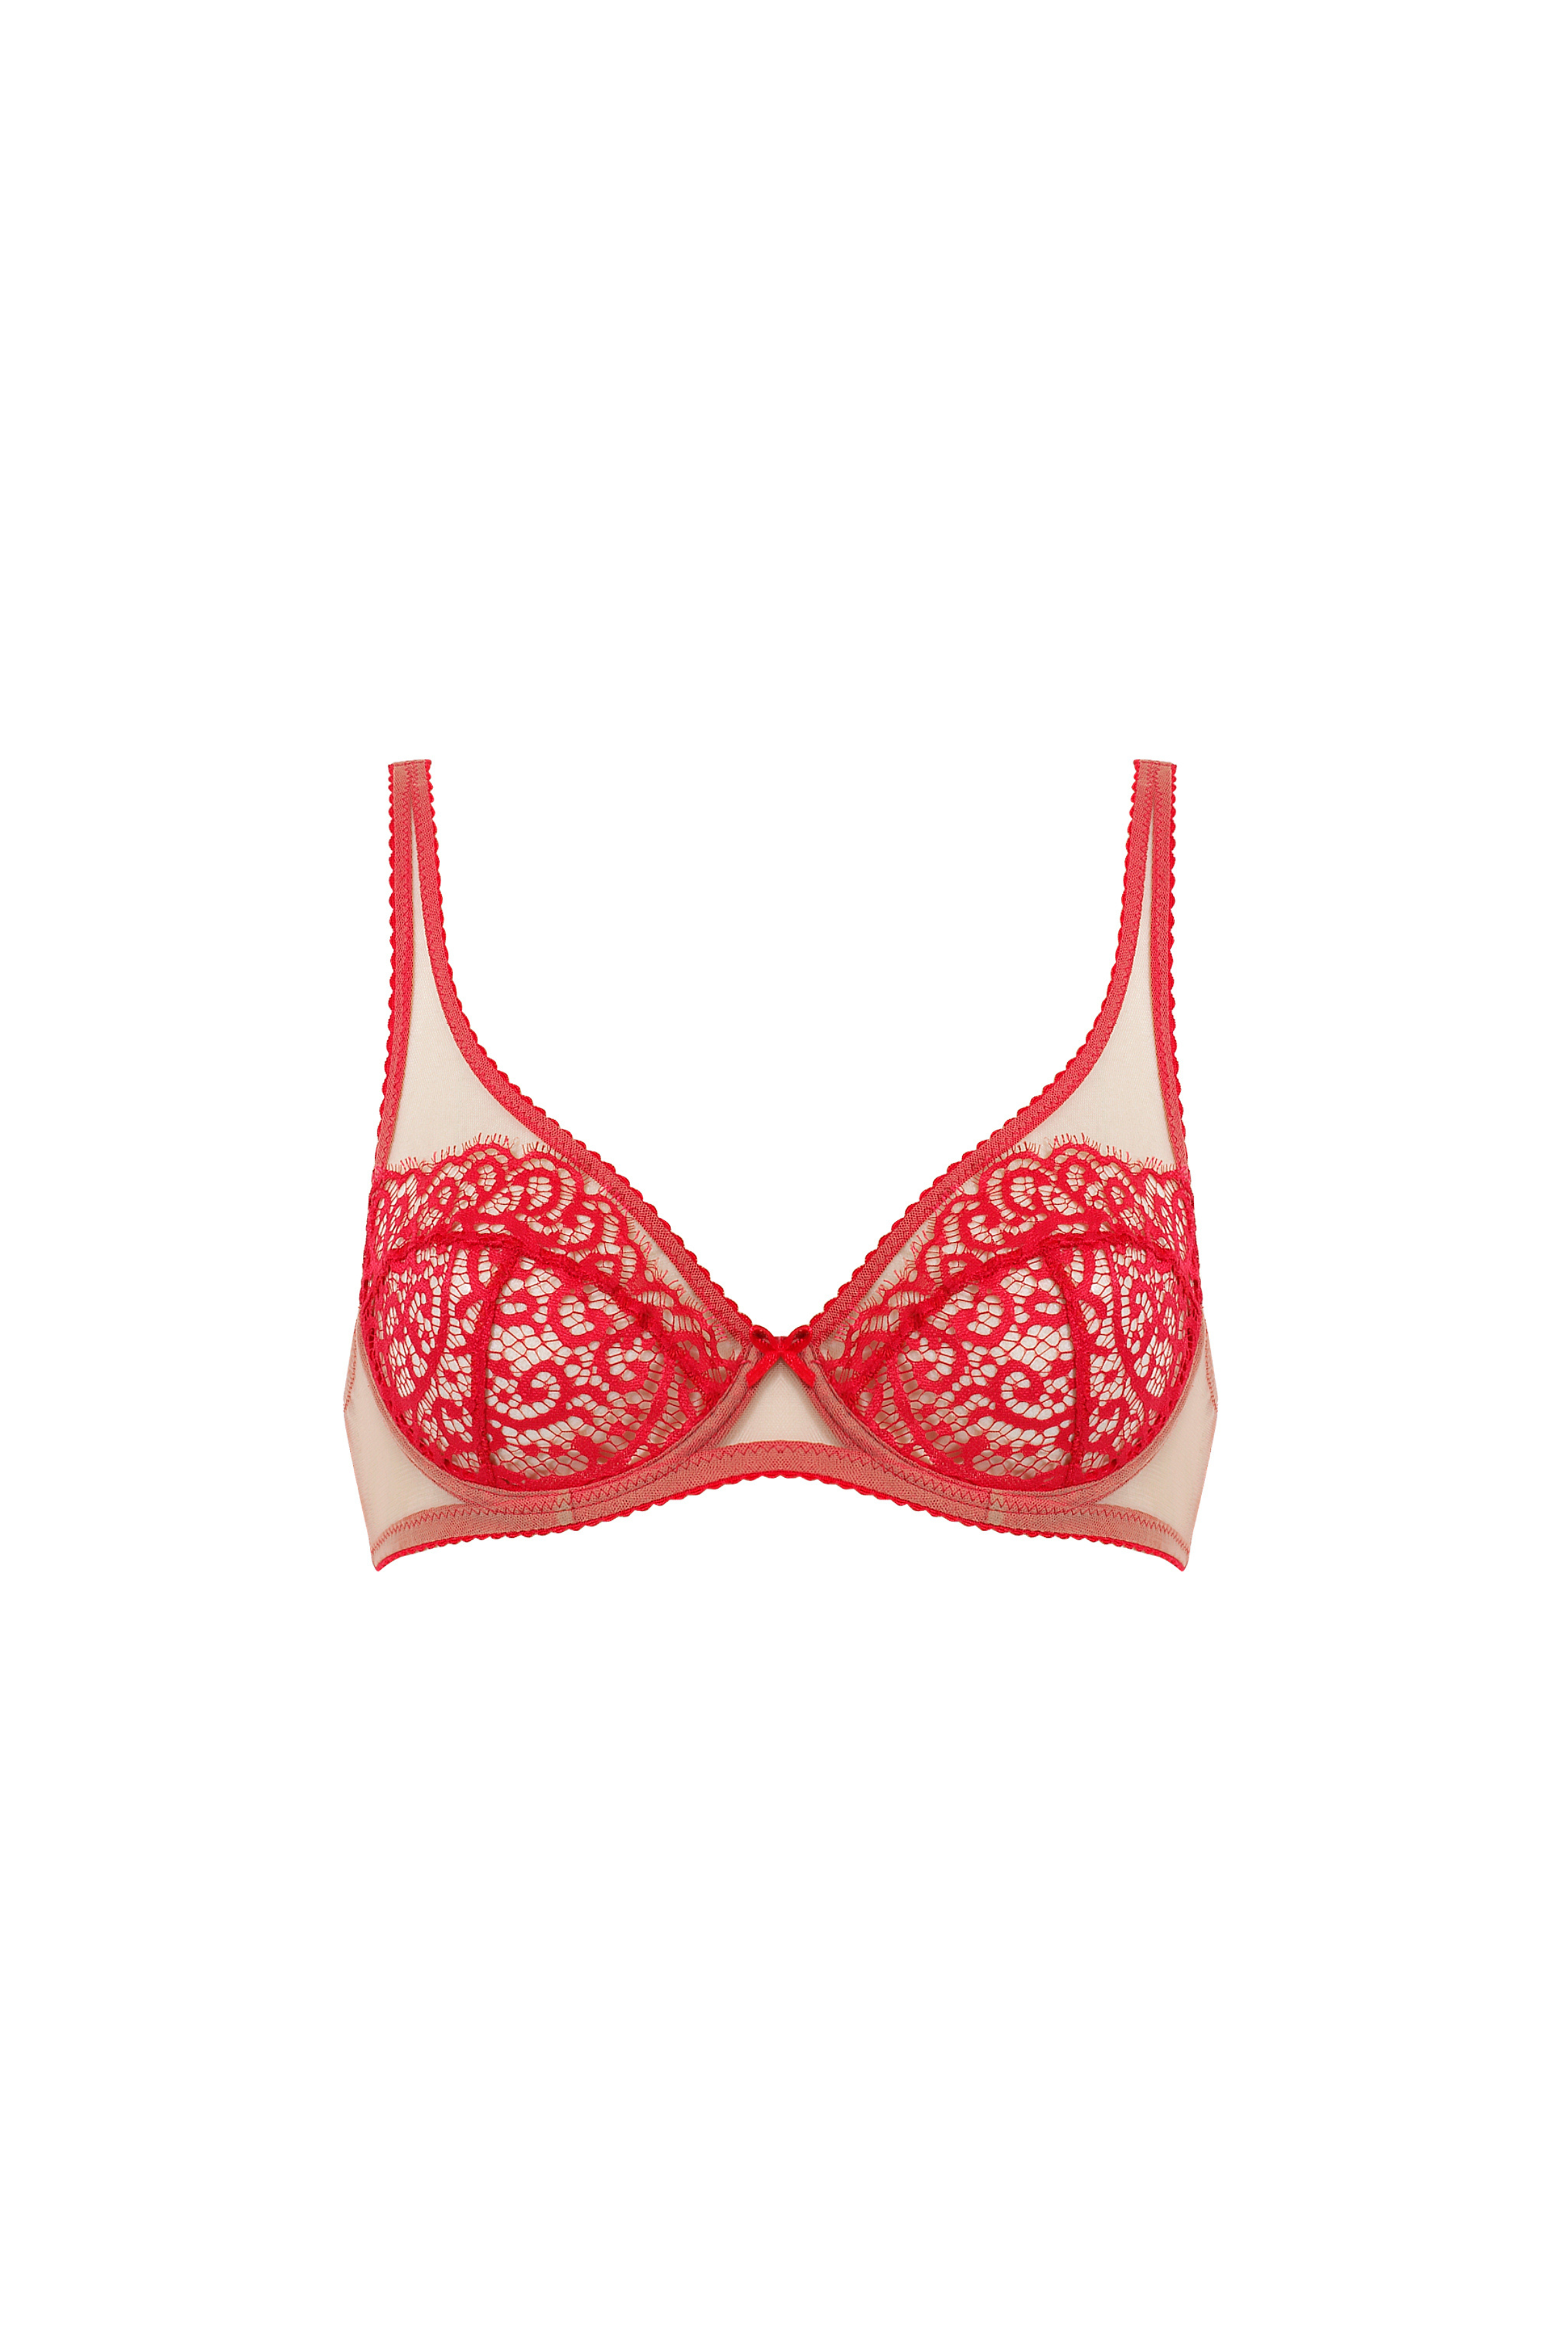 Pepper Lace Lift Up Bra in Cayenne Red , 34A.NWOT 